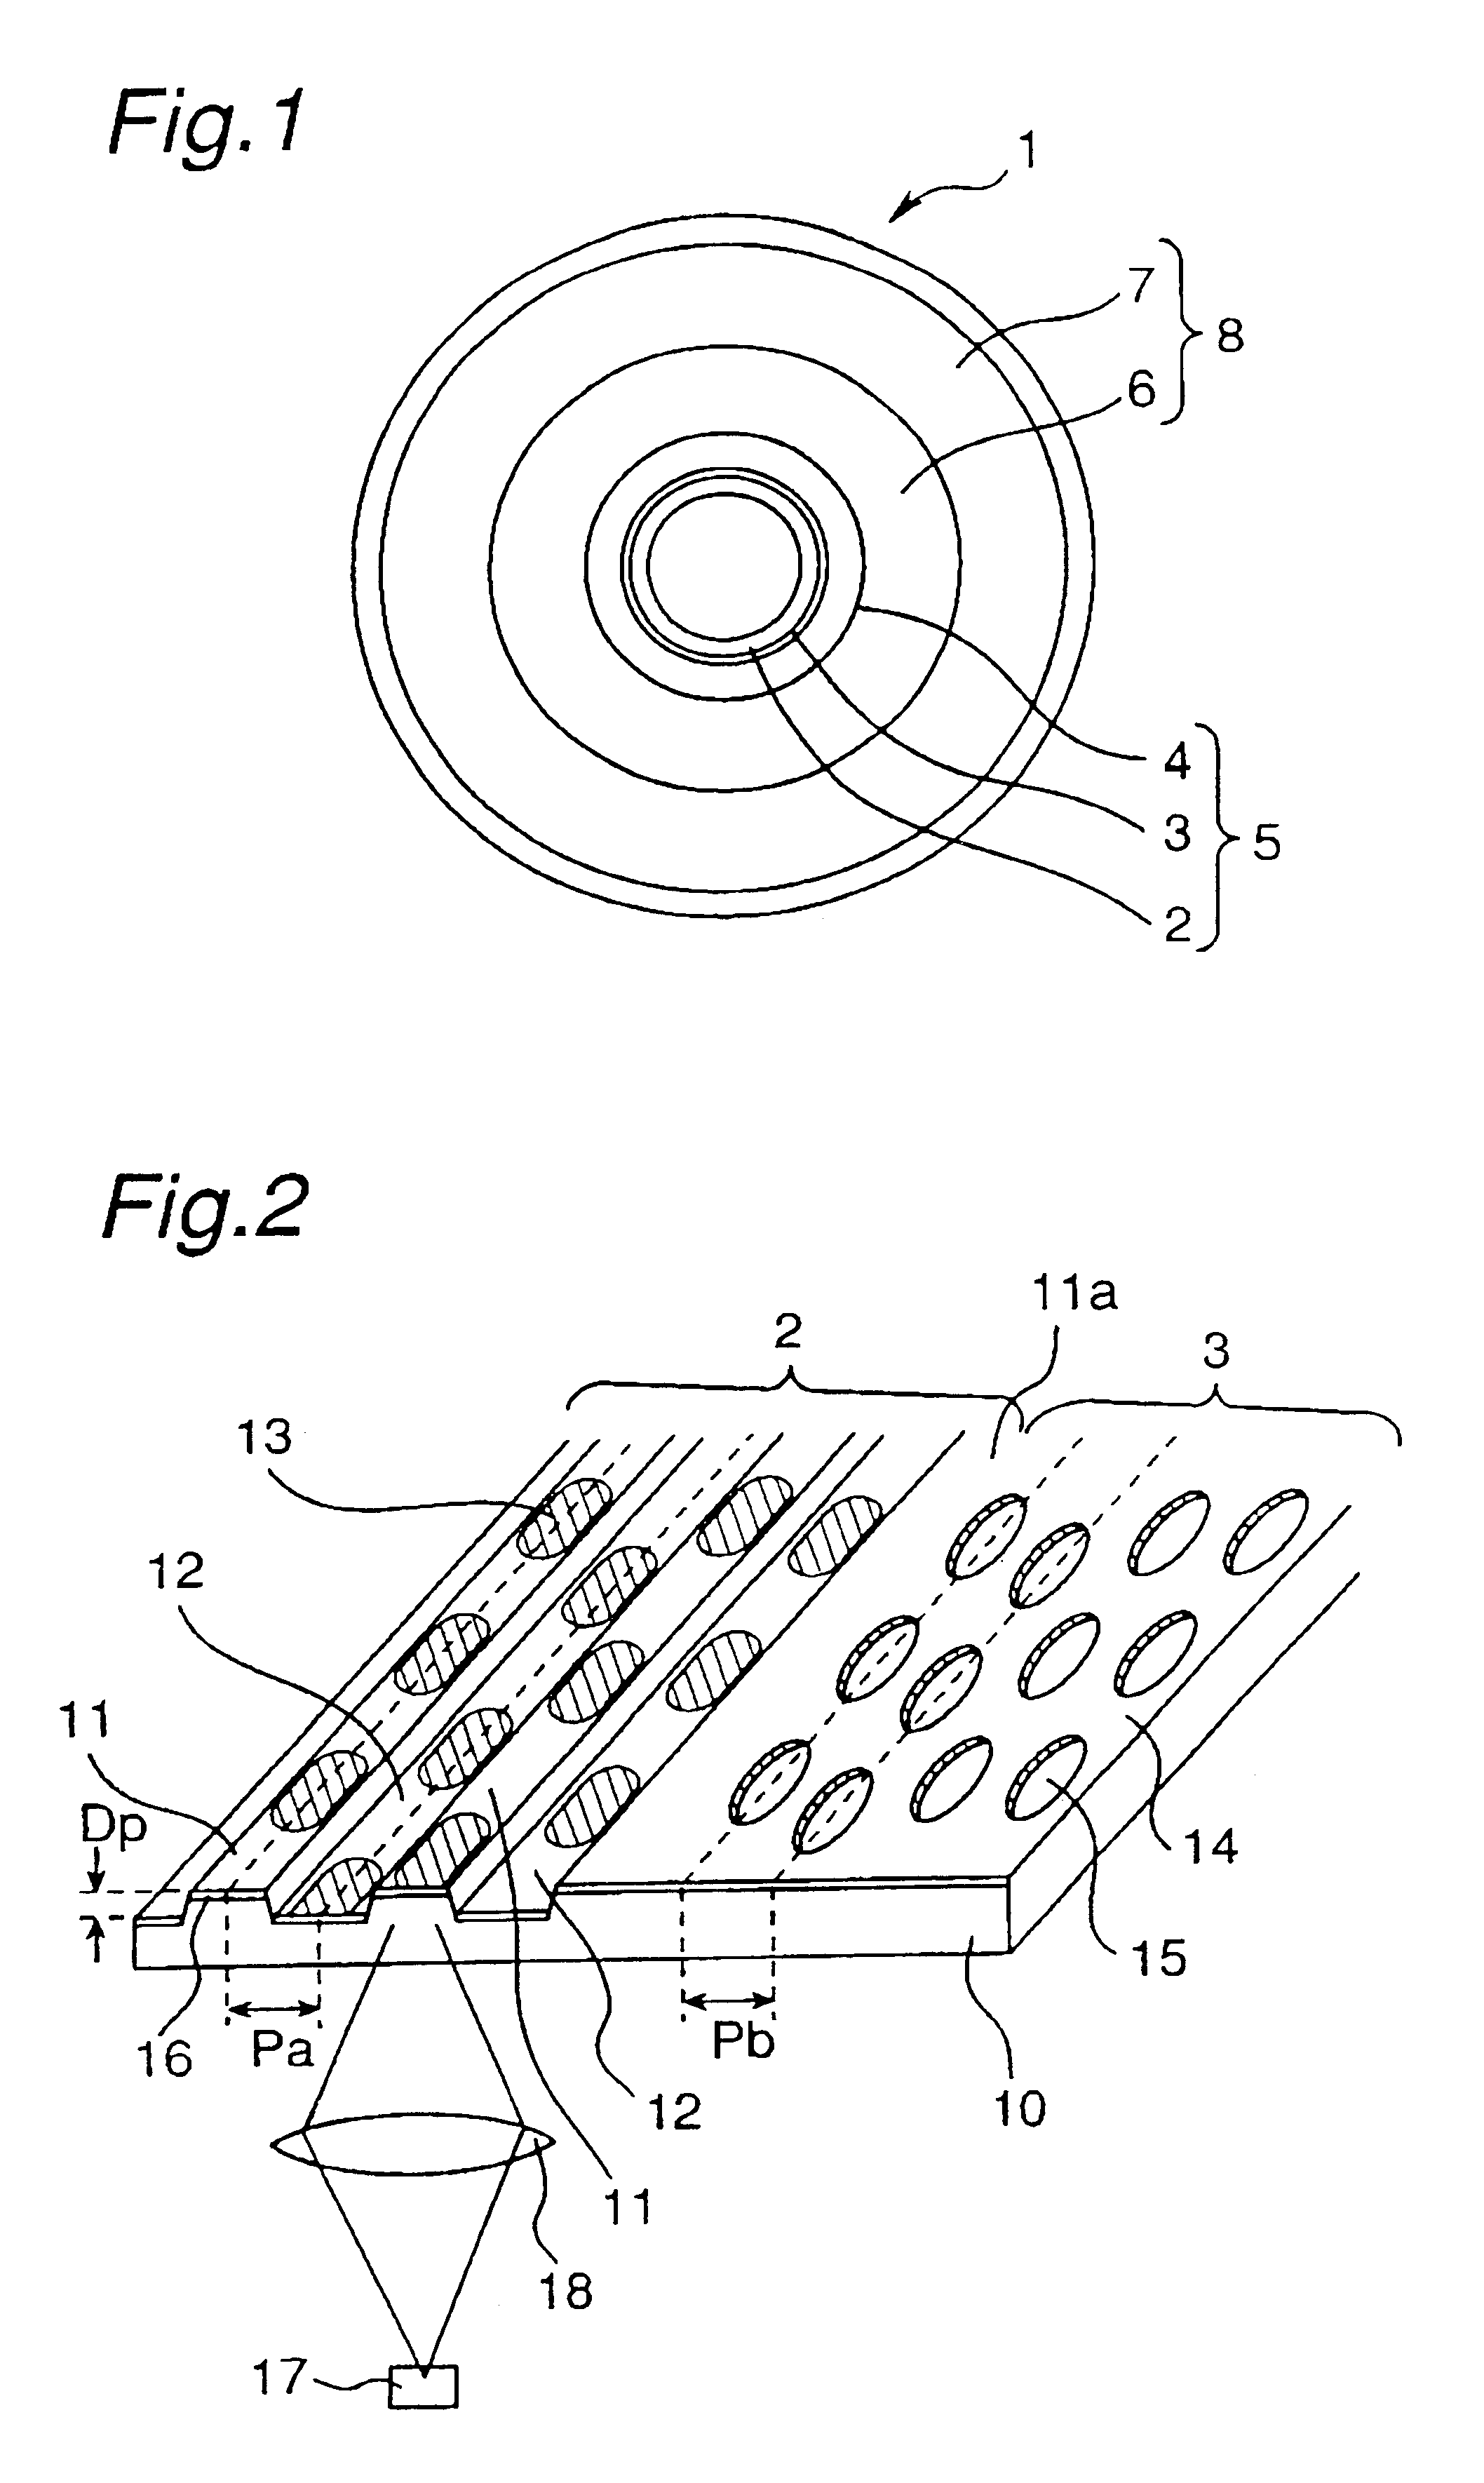 Optical disc with a rewritable area and a read-only area